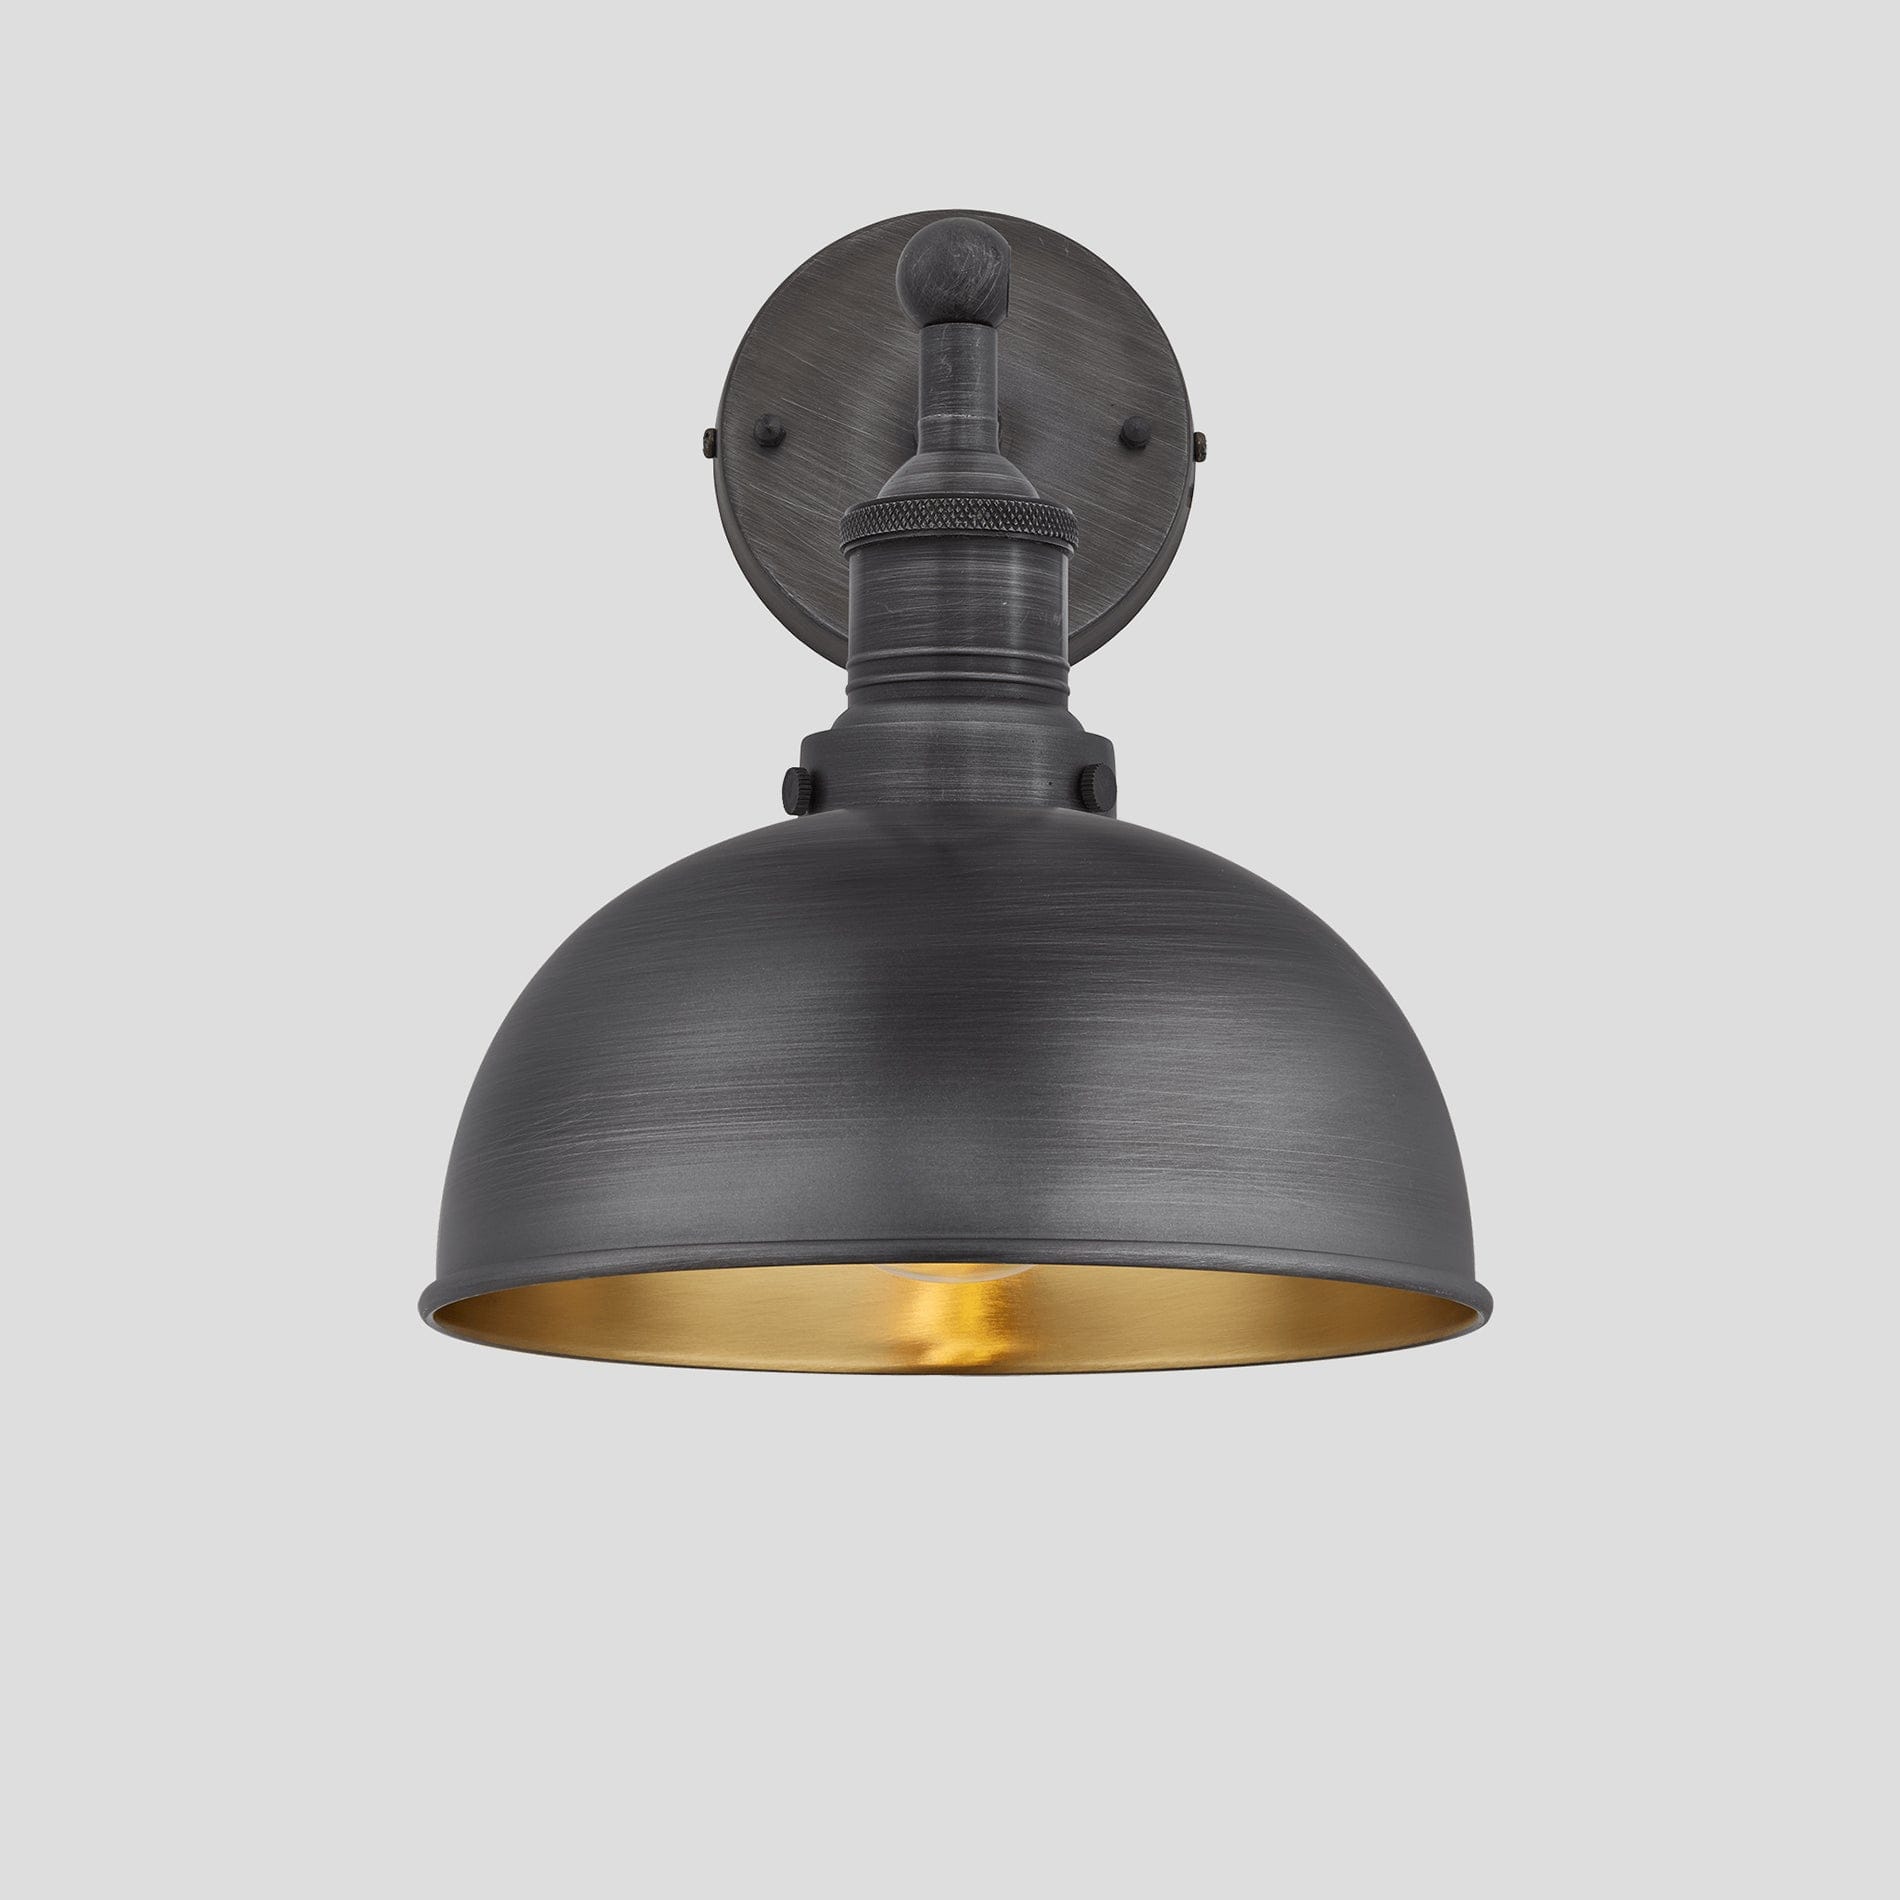 Brooklyn Dome Wall Light - 8 Inch - Pewter & Brass Industville BR-DWL8-BP-PH